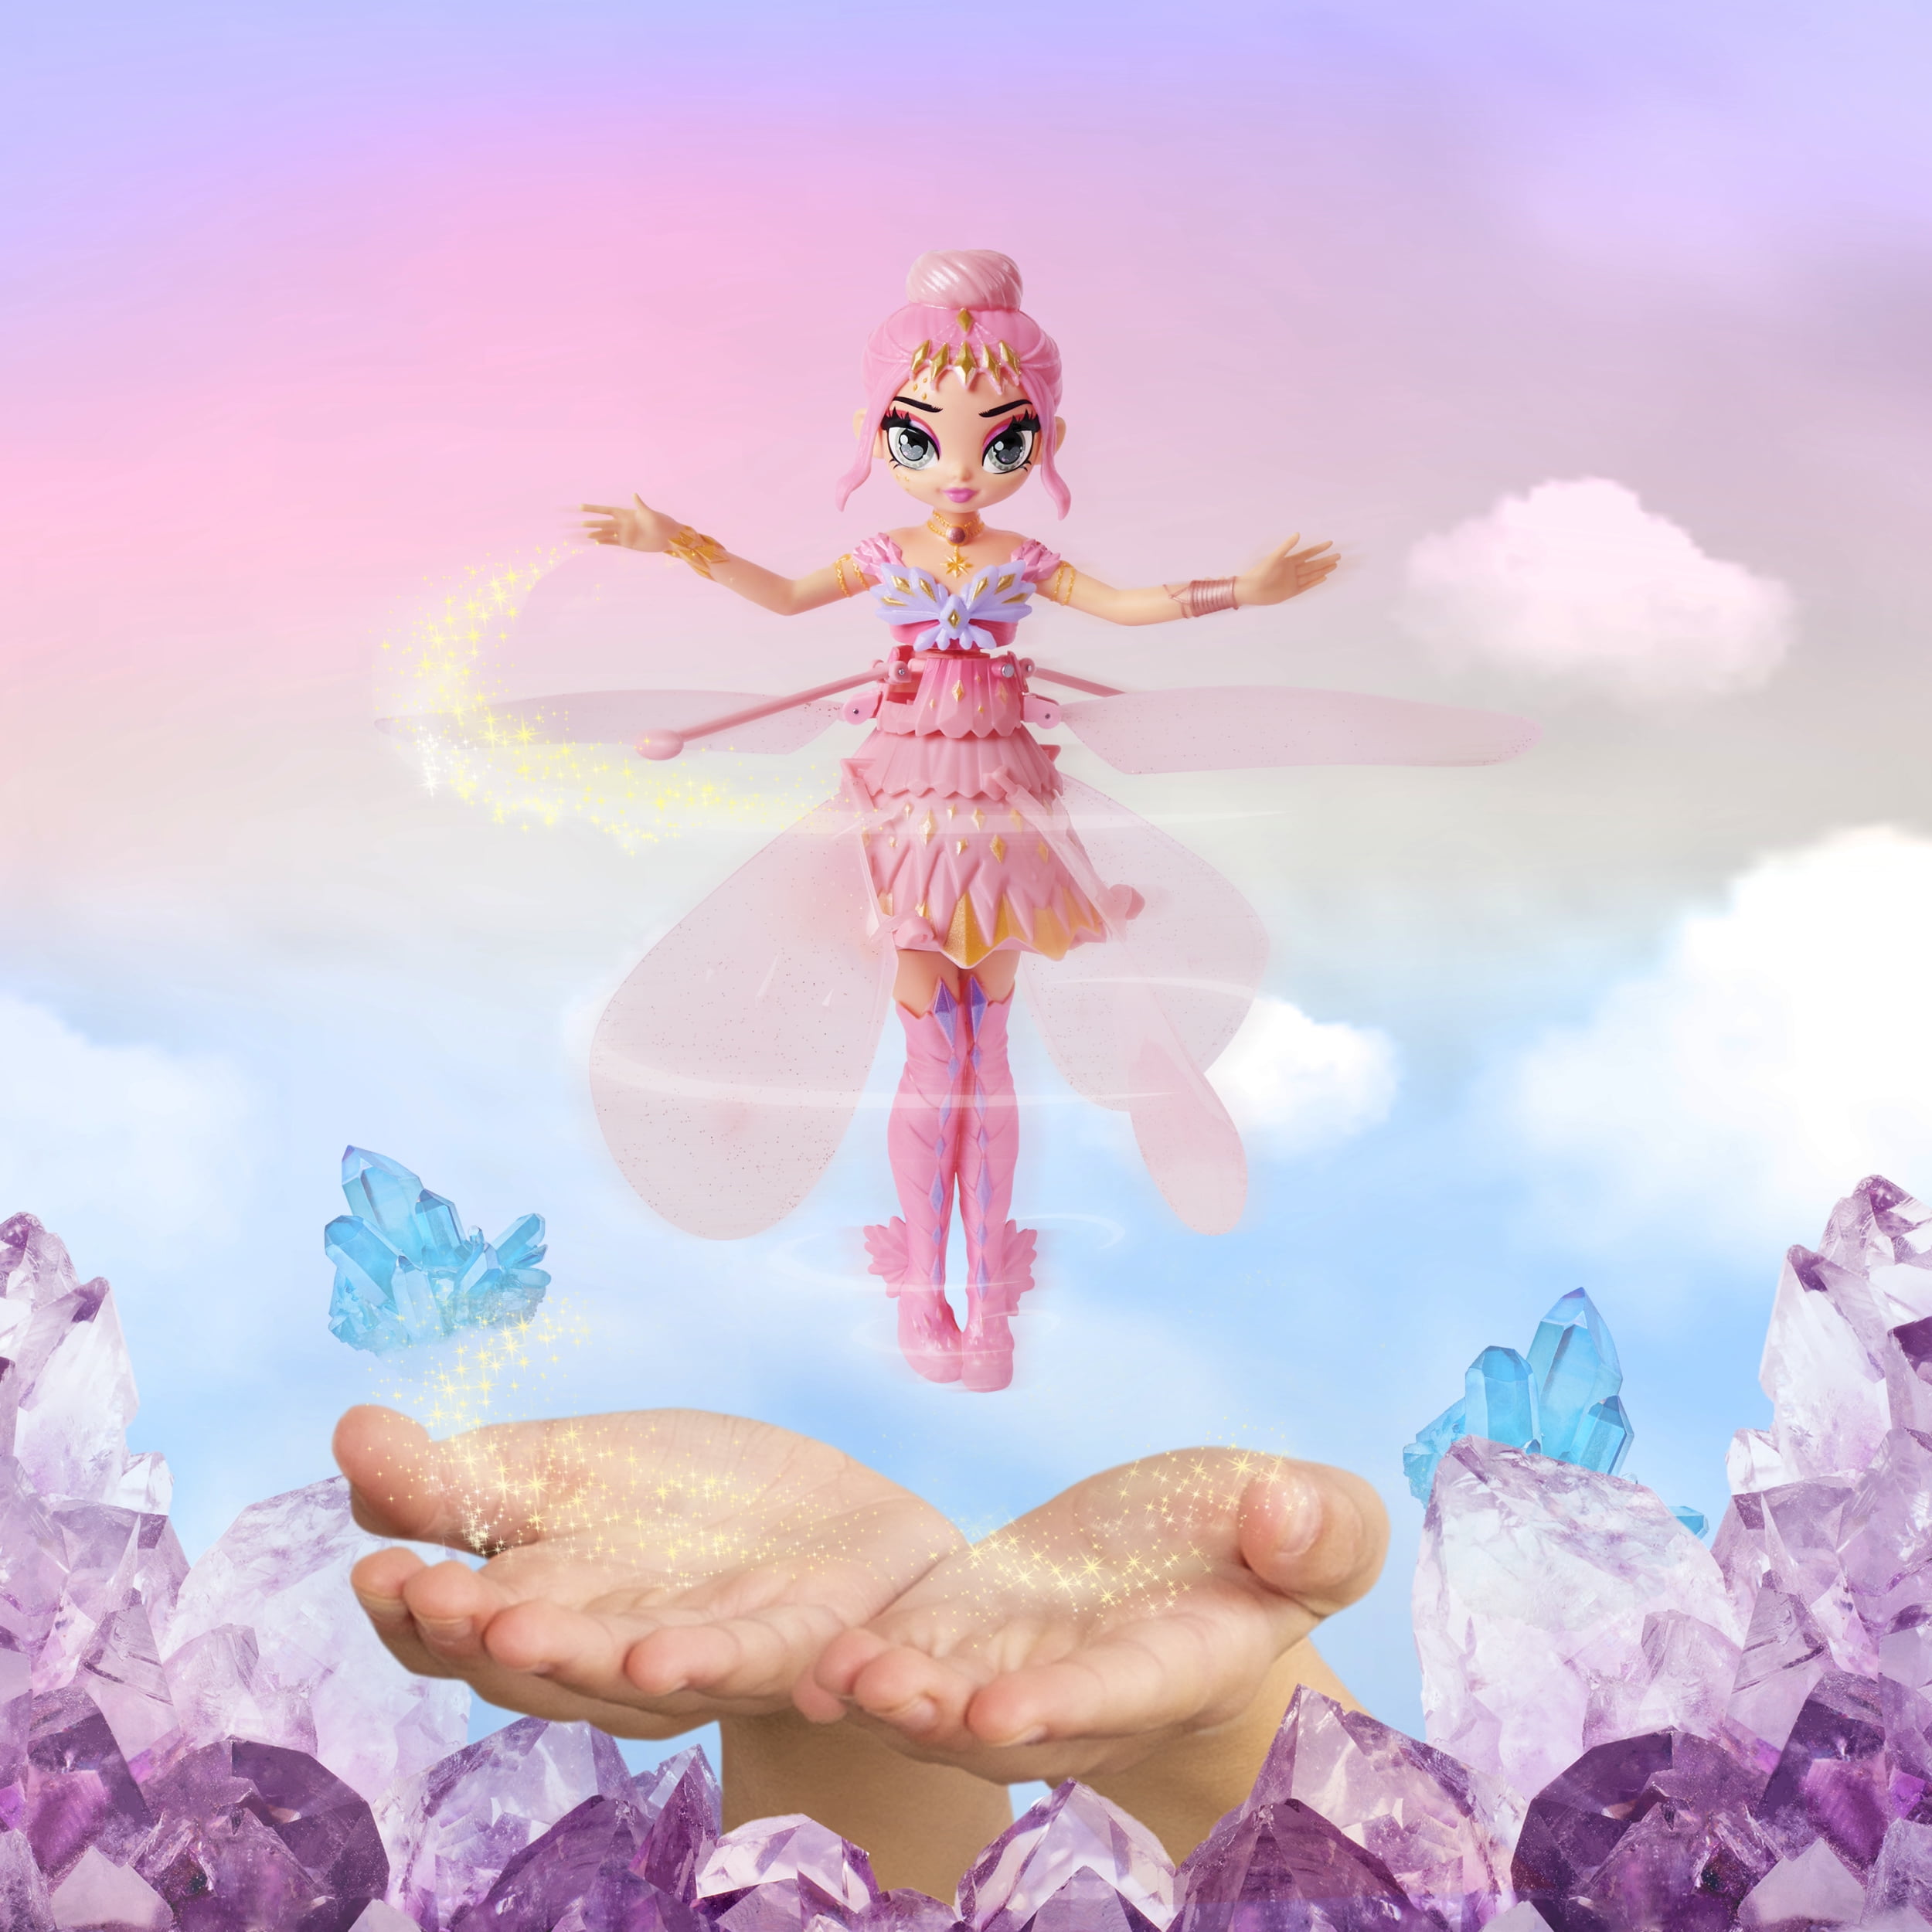 Crystal Flyers Starlight Idol Magical Flying Pixie Toy with Lights Kids Toys for Girls Ages 6 and up Hatchimals Pixies 